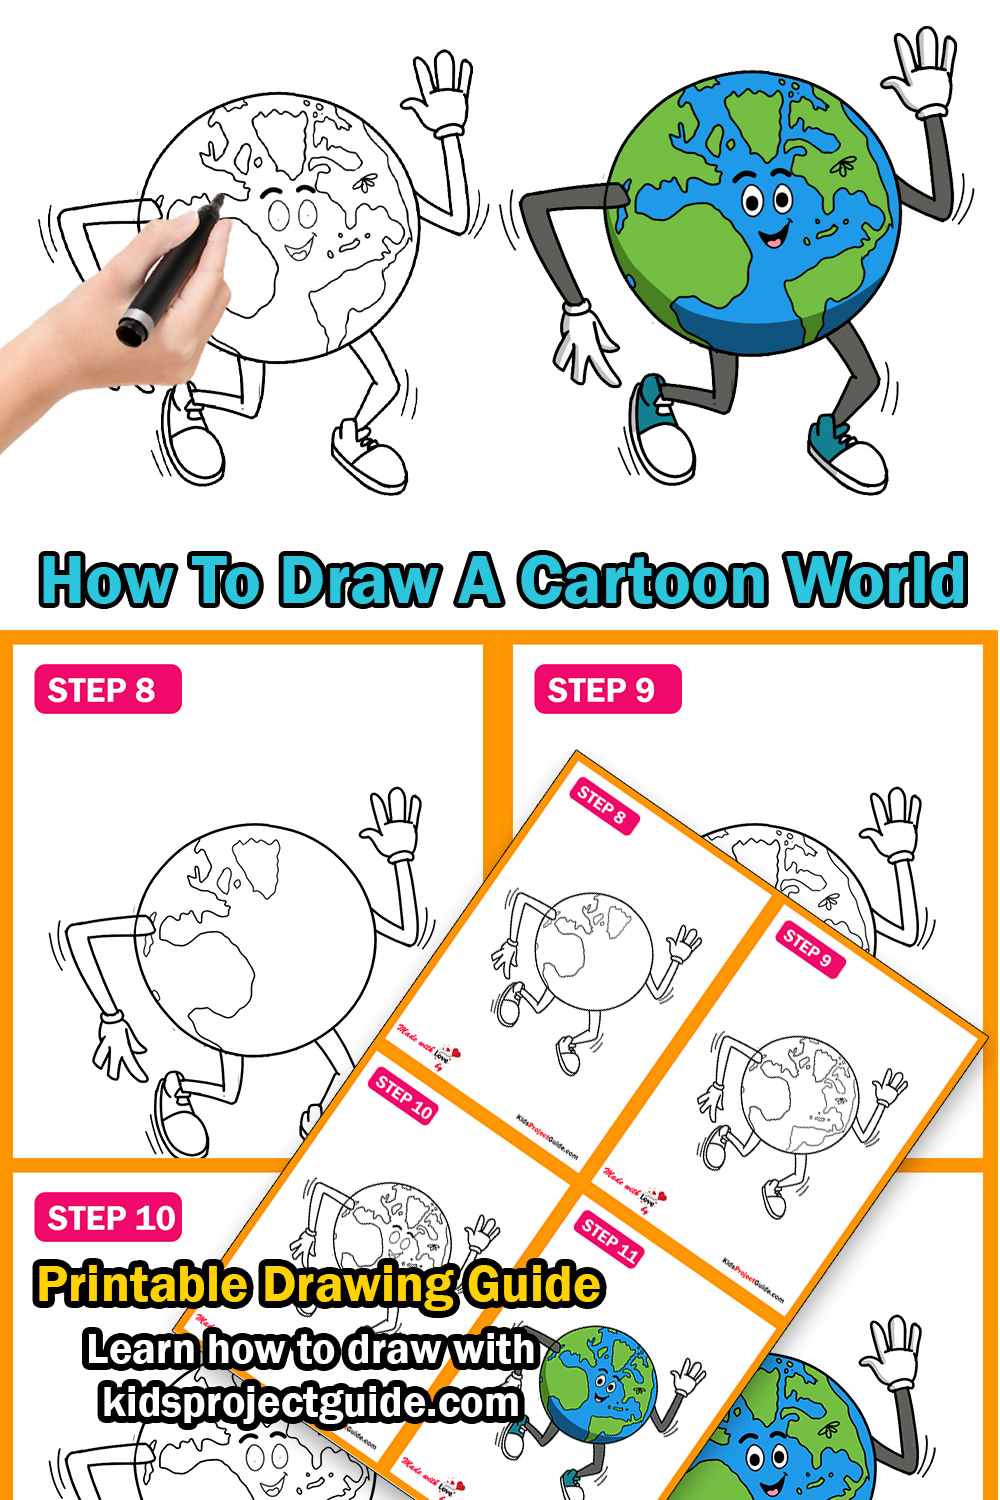 How To Draw A Cartoon World | Easy Step By Step Guide